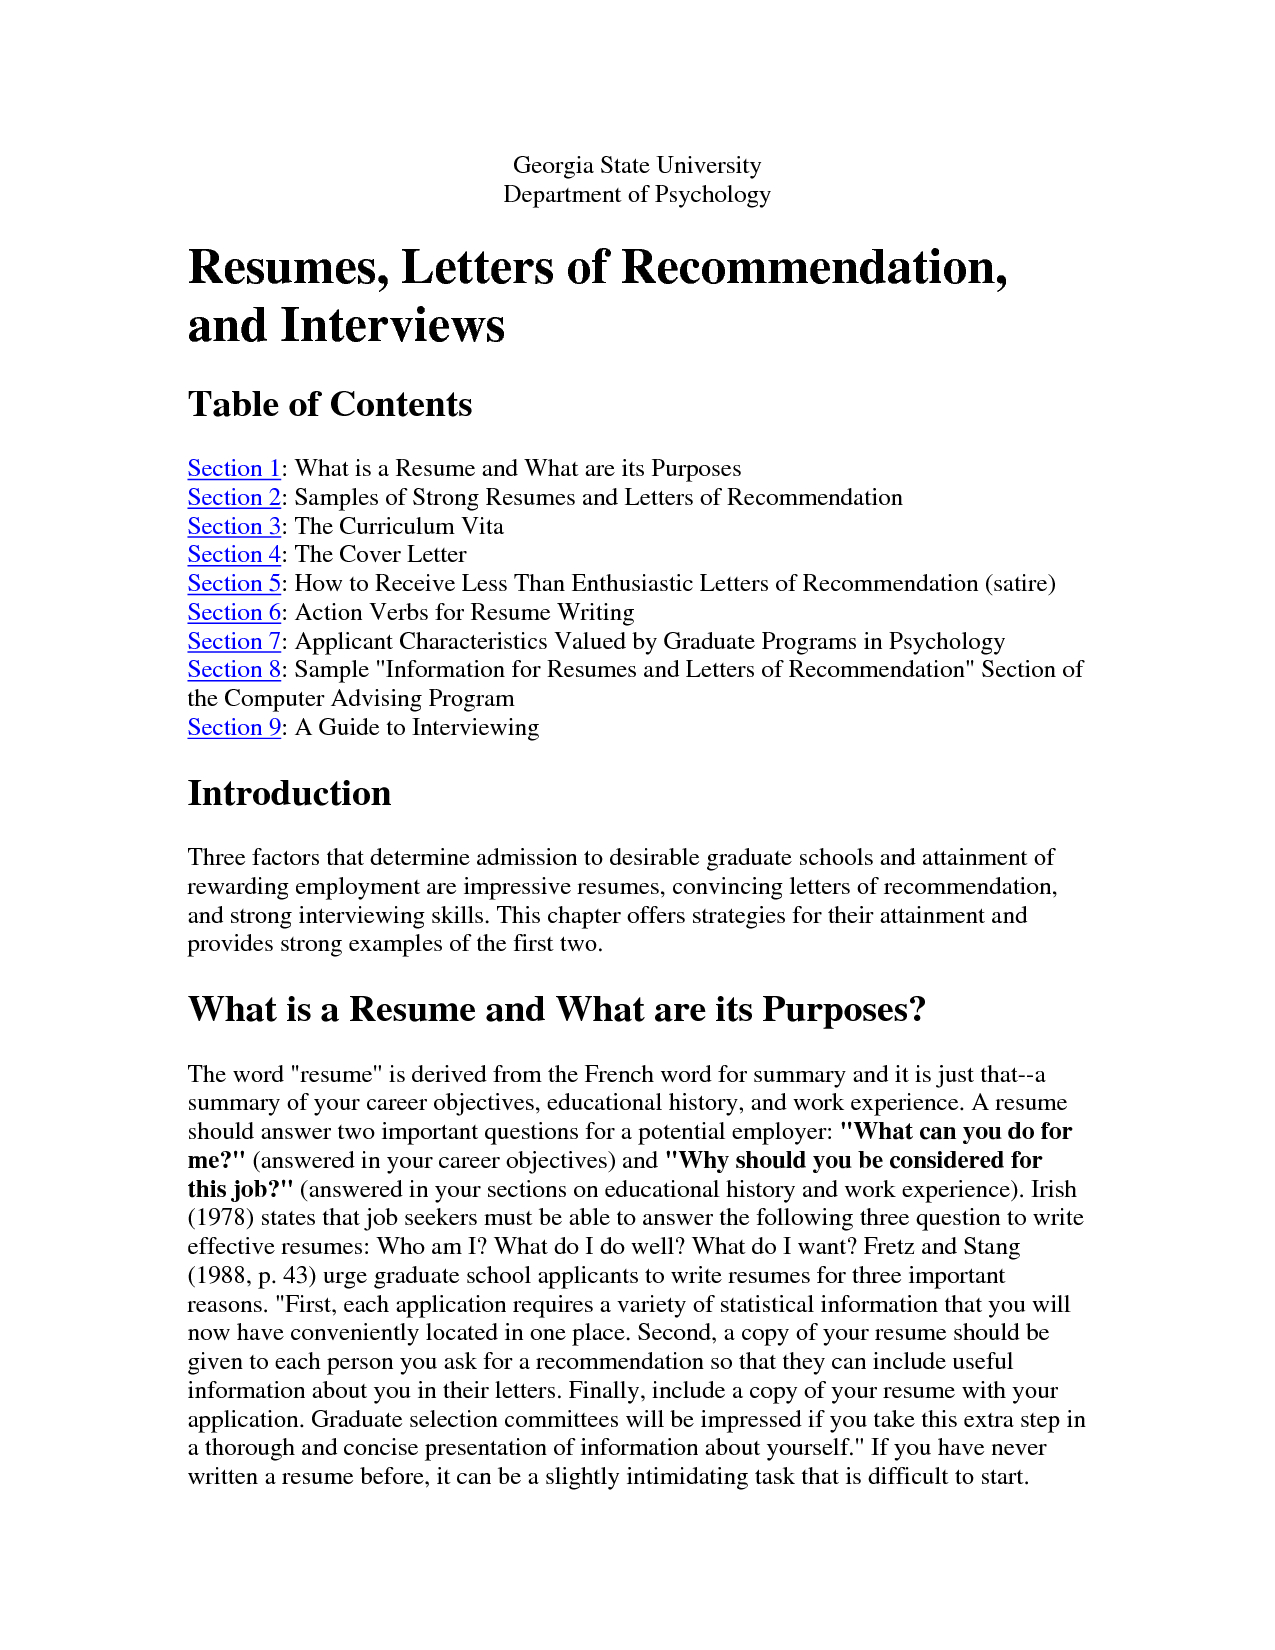 Scholarship Letter Of Recommendation Template - Scholarship Letter Re Mendation Samples From Employerwriting A